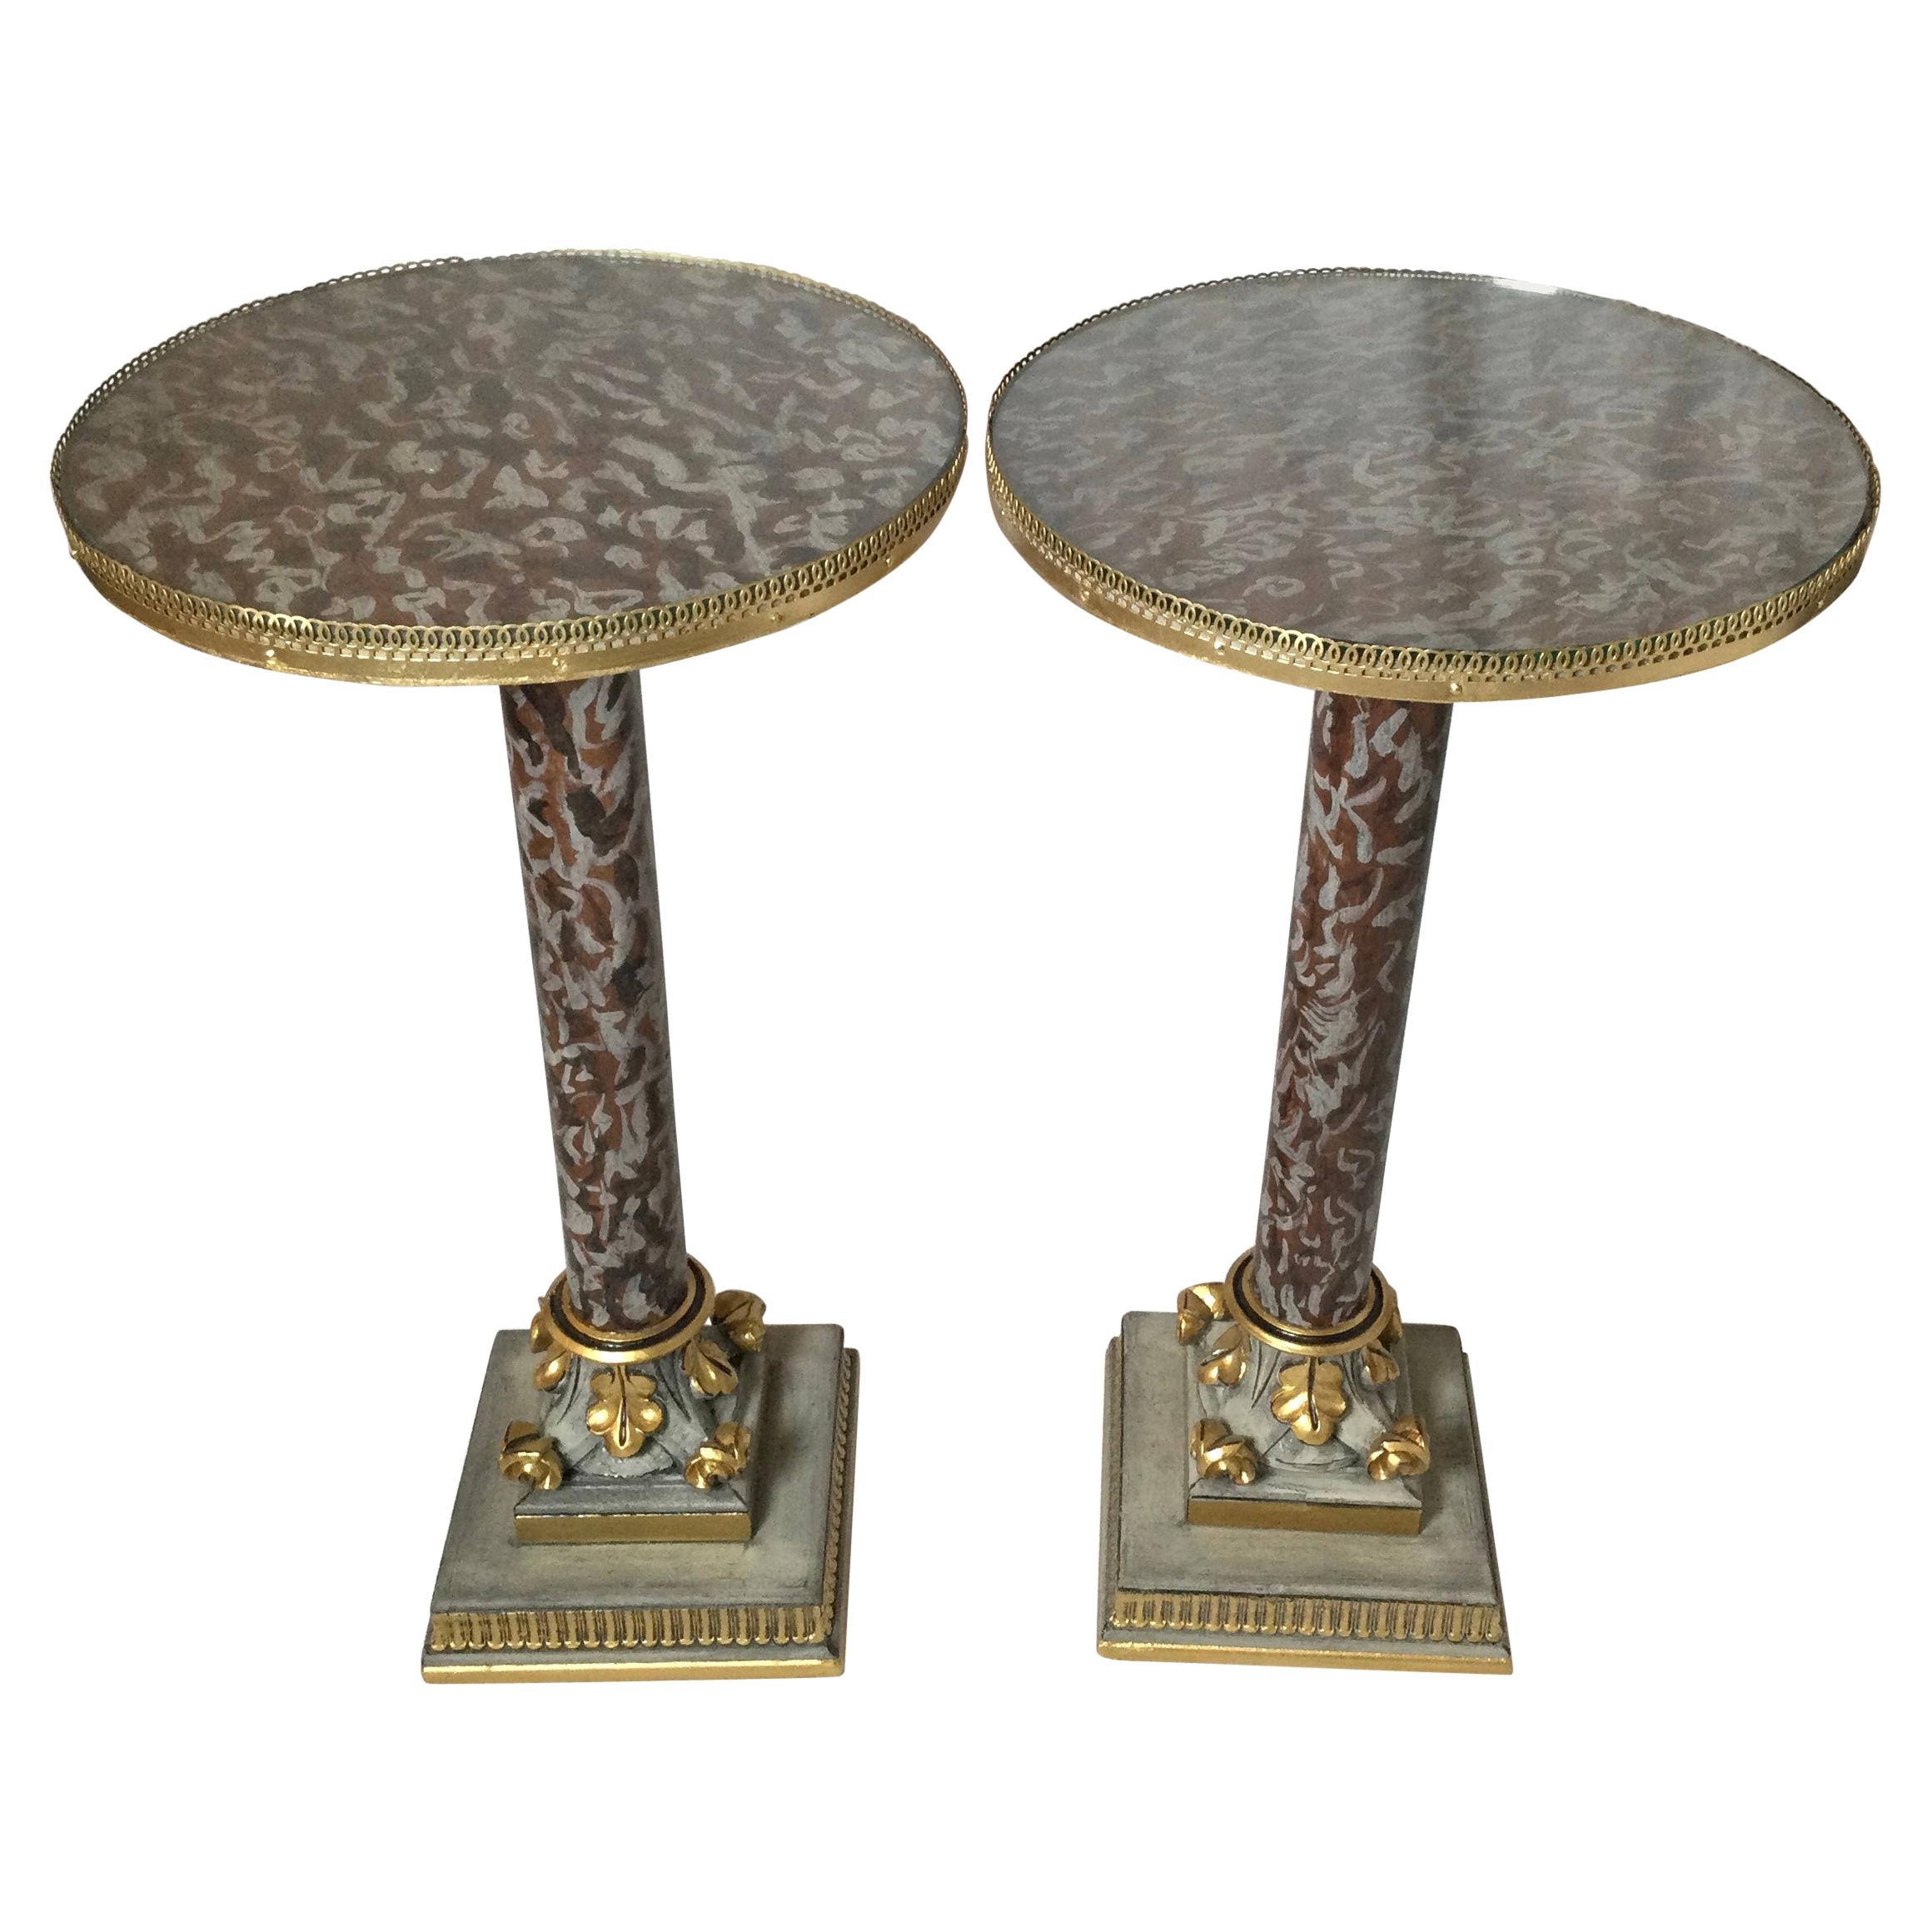 Pair of Wood Faux Marble Painted Round Side Tables